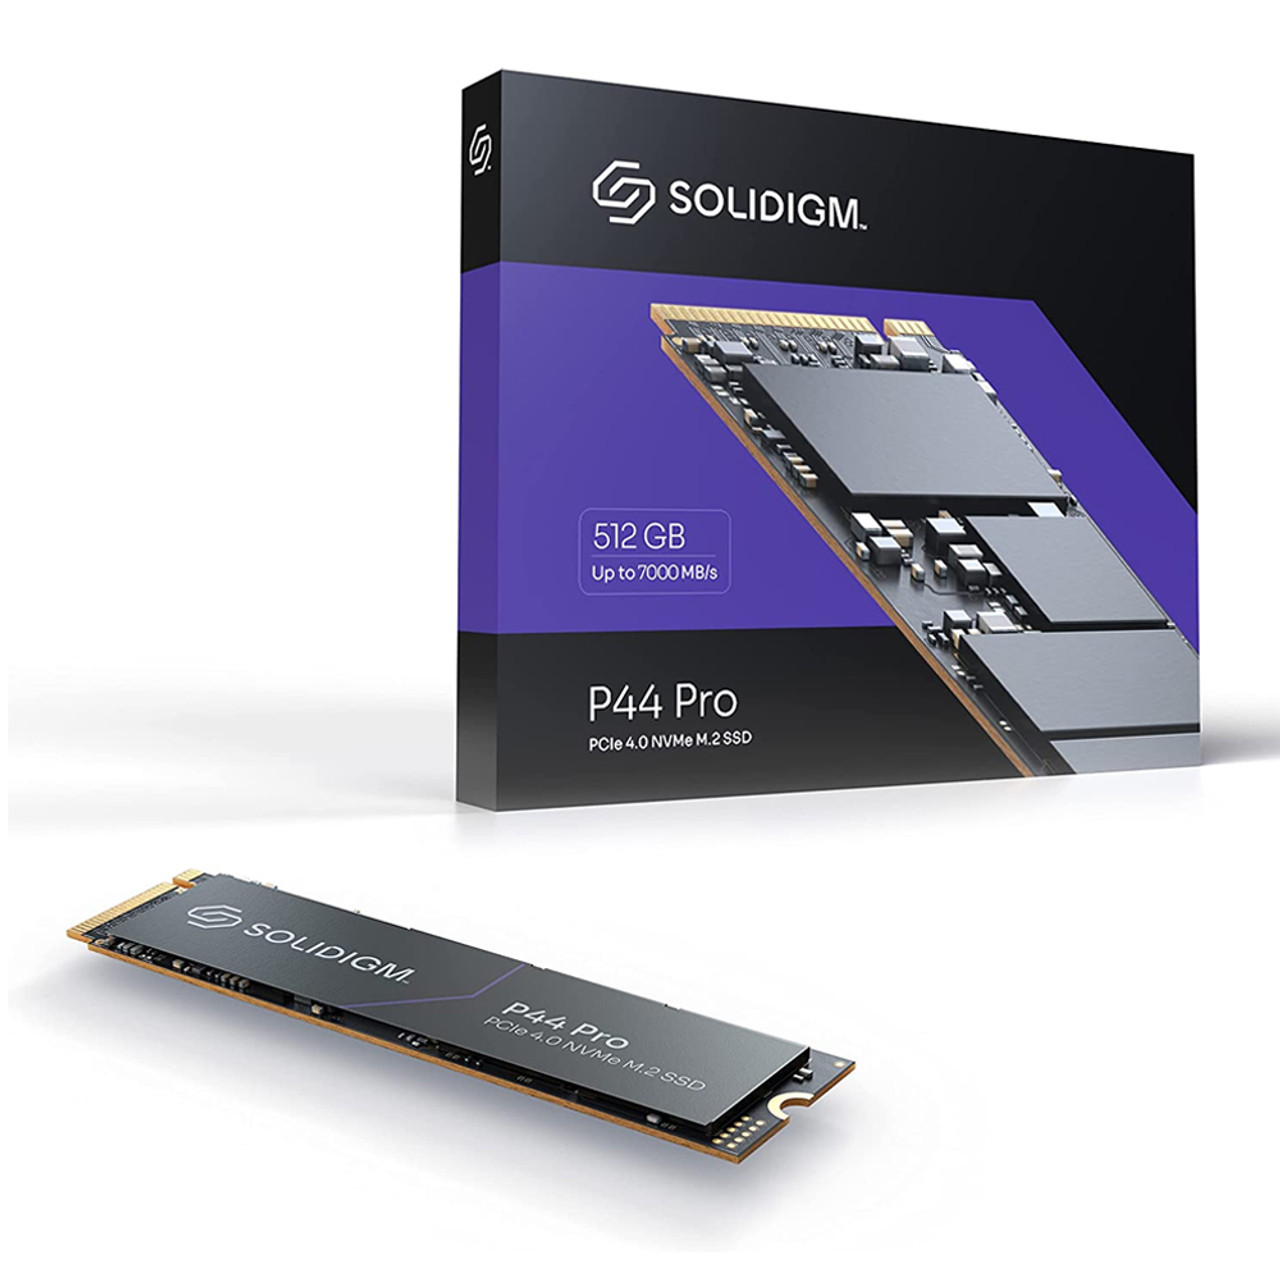 Solidigm SSDPFKKW512H7X1 P44 Pro 512GB M.2 2280 PCIe GEN 4 NVMe 4.0 x4  Internal Solid-State Drive, Speed up to 7000MB/s